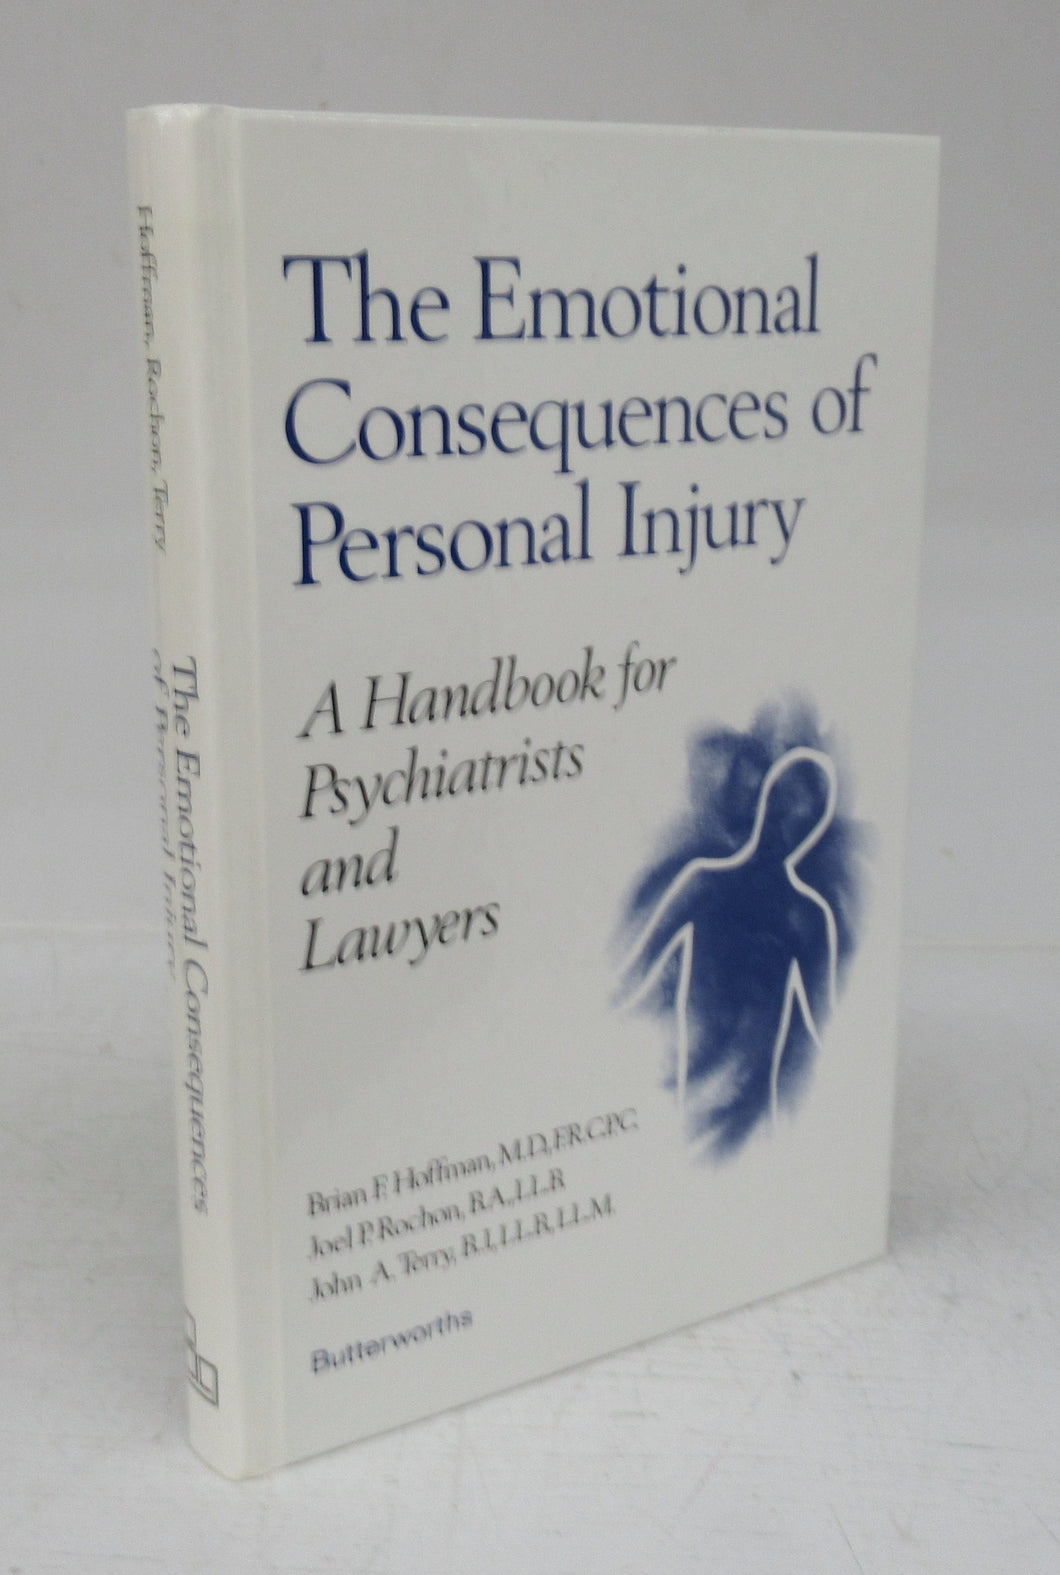 The Emotional Consequences of Personal Injury: A Handbook for Psychiatrists and Lawyers